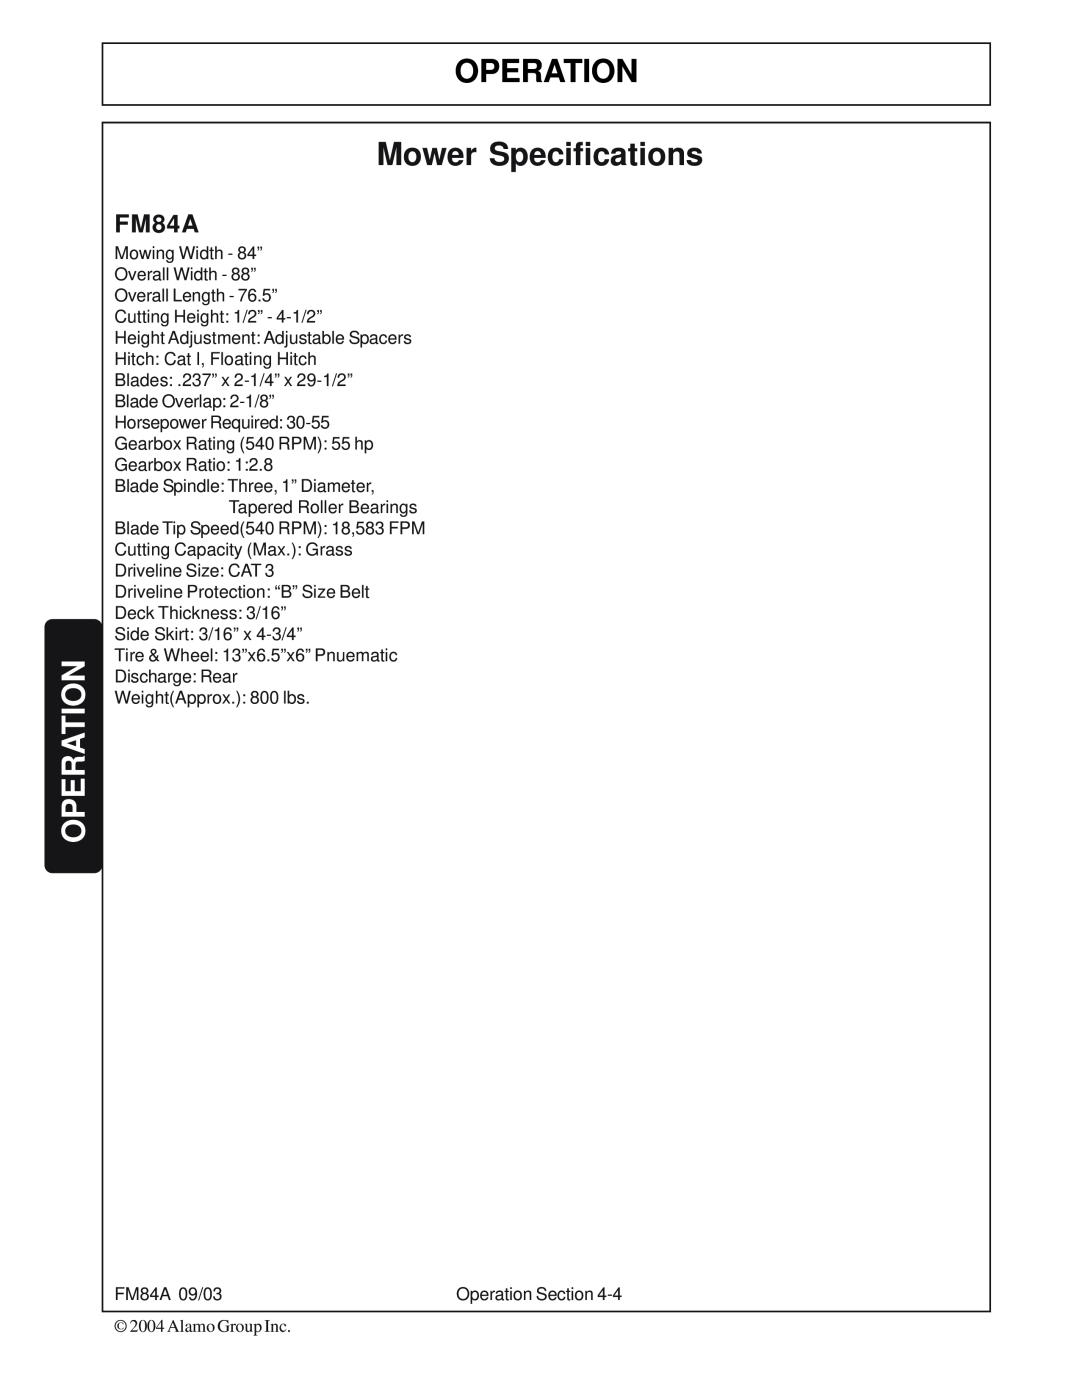 Servis-Rhino FM84A manual OPERATION Mower Specifications, Operation 